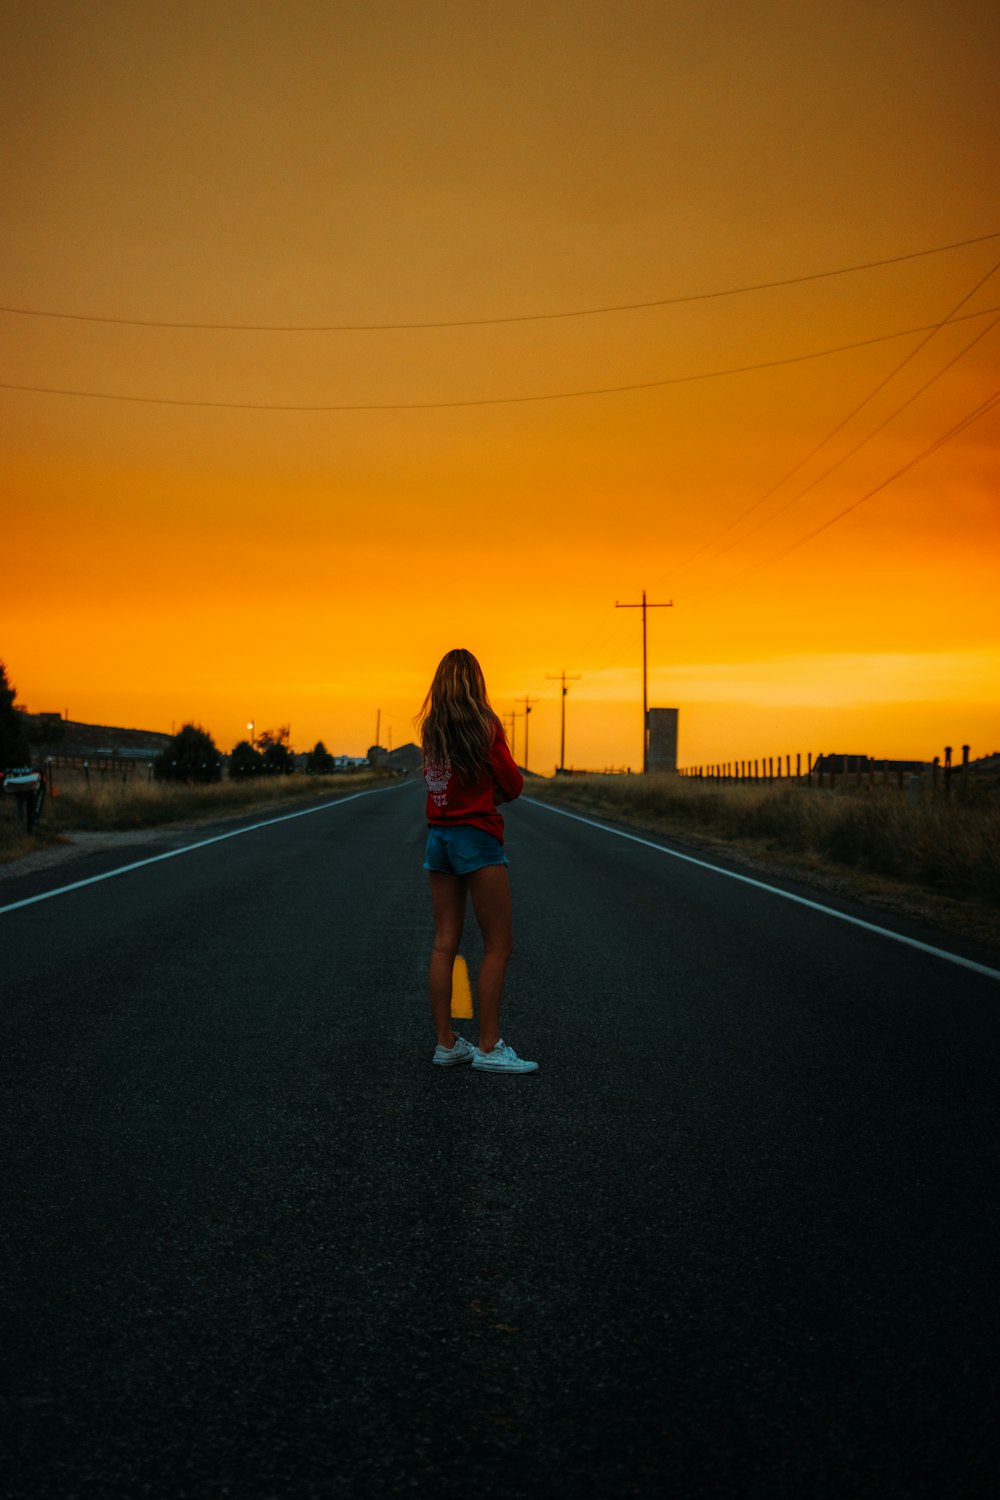 woman in red shirt standing on road during sunset